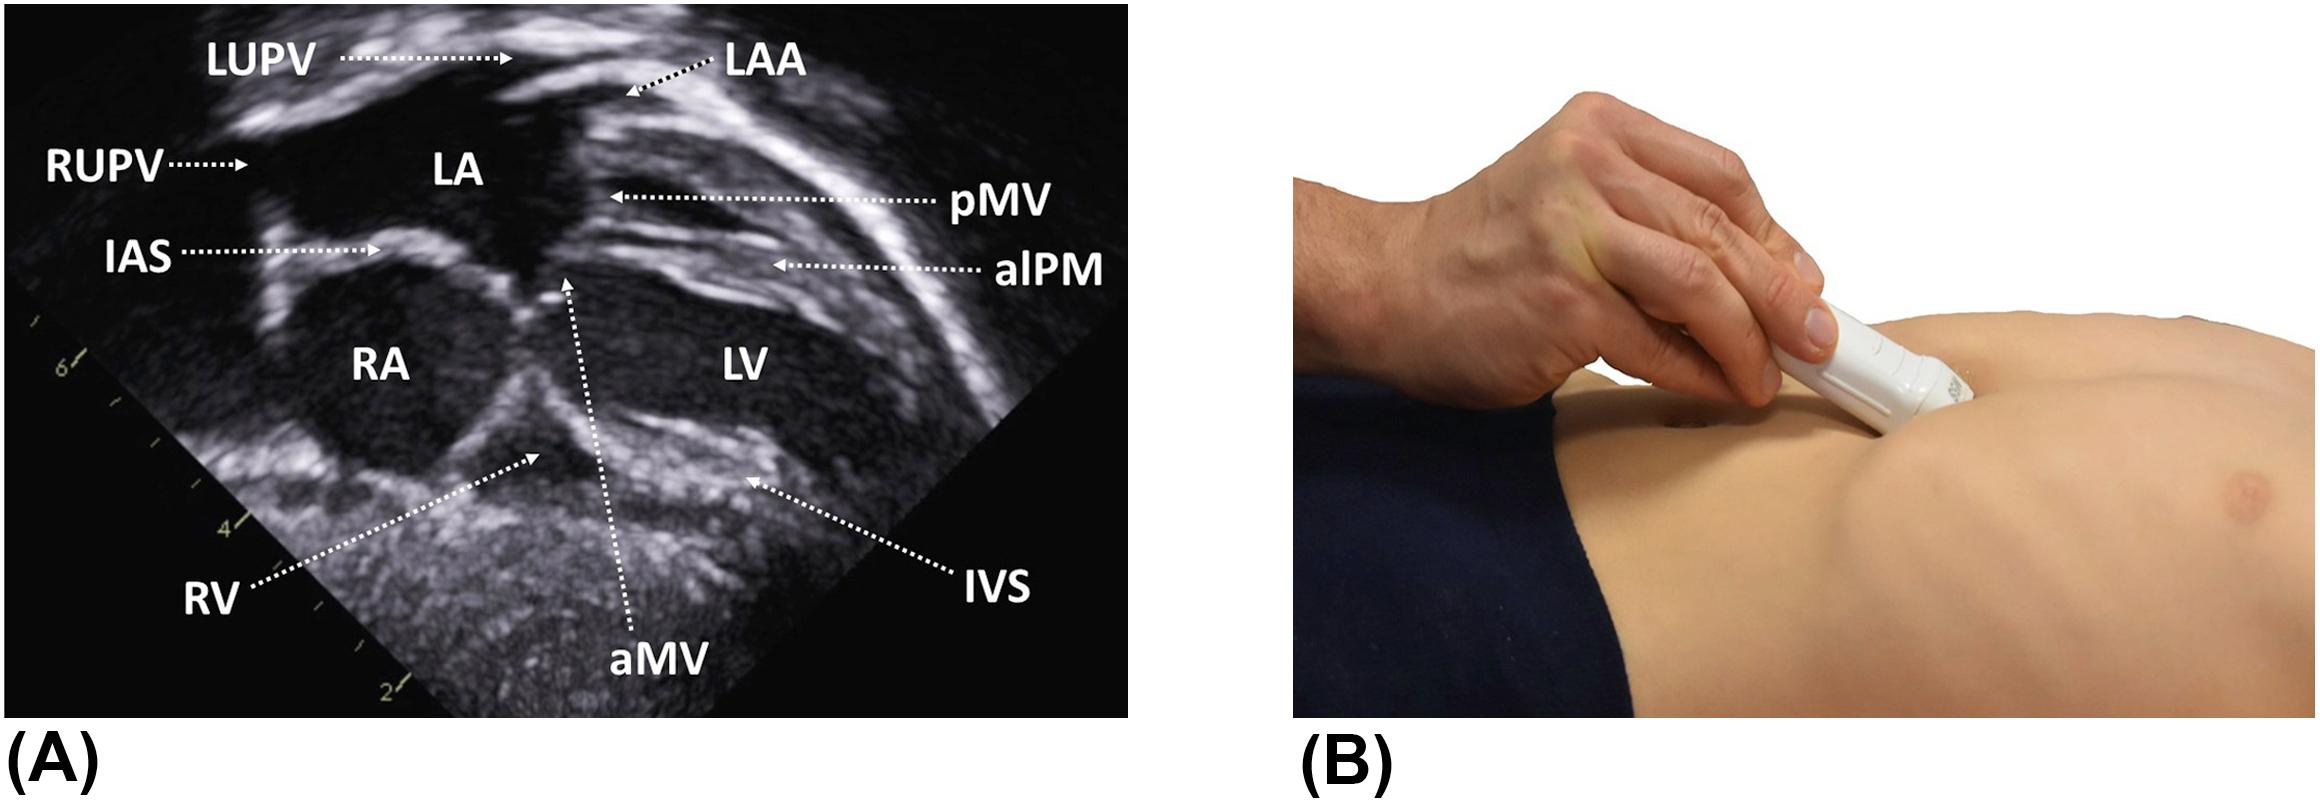 Figure 5, (A) Subcostal long-axis (four-chamber) view. The cardiac chambers, atrial and ventricular septae, and upper pulmonary veins are visualized. (B) The probe is at the 3 o'clock position, angulated inferiorly. alPM , anterolateral papillary muscle; aMV , anterior mitral valve leaflet; IAS , interatrial septum; IVS , interventricular septum; LA , left atrium; LAA , left atrial appendage; LUPV , left upper pulmonary vein; LV , left ventricle; pMV , posterior mitral valve leaflet; RA , right atrium; RUPV , right upper pulmonary vein; RV , right ventricle.